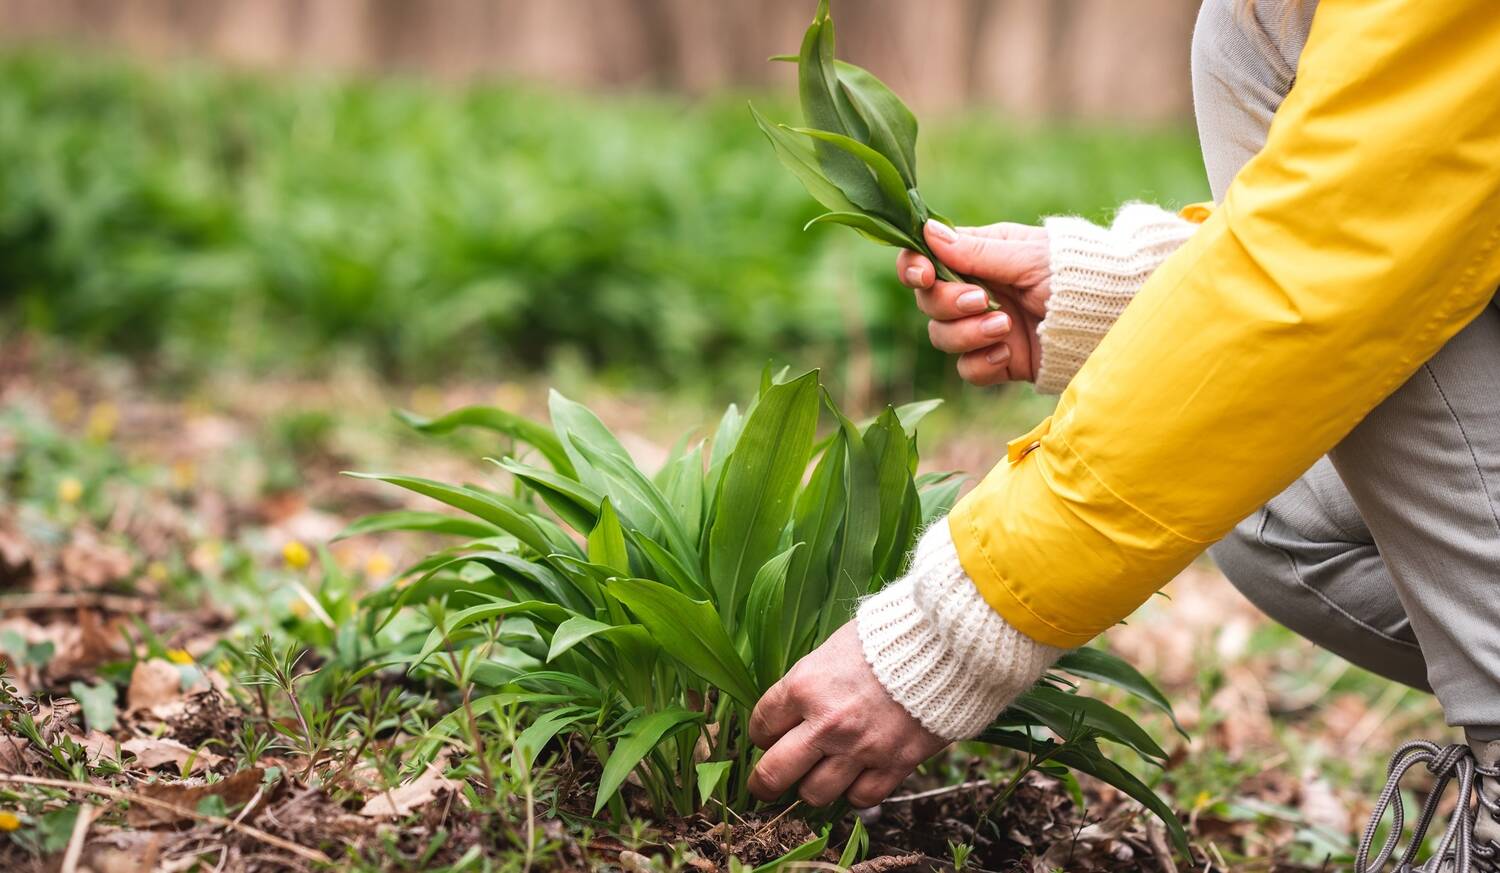 Woman wearing a yellow raincoat and walking boots is crouched on the ground in a forest, picking fresh wild garlic leaves.